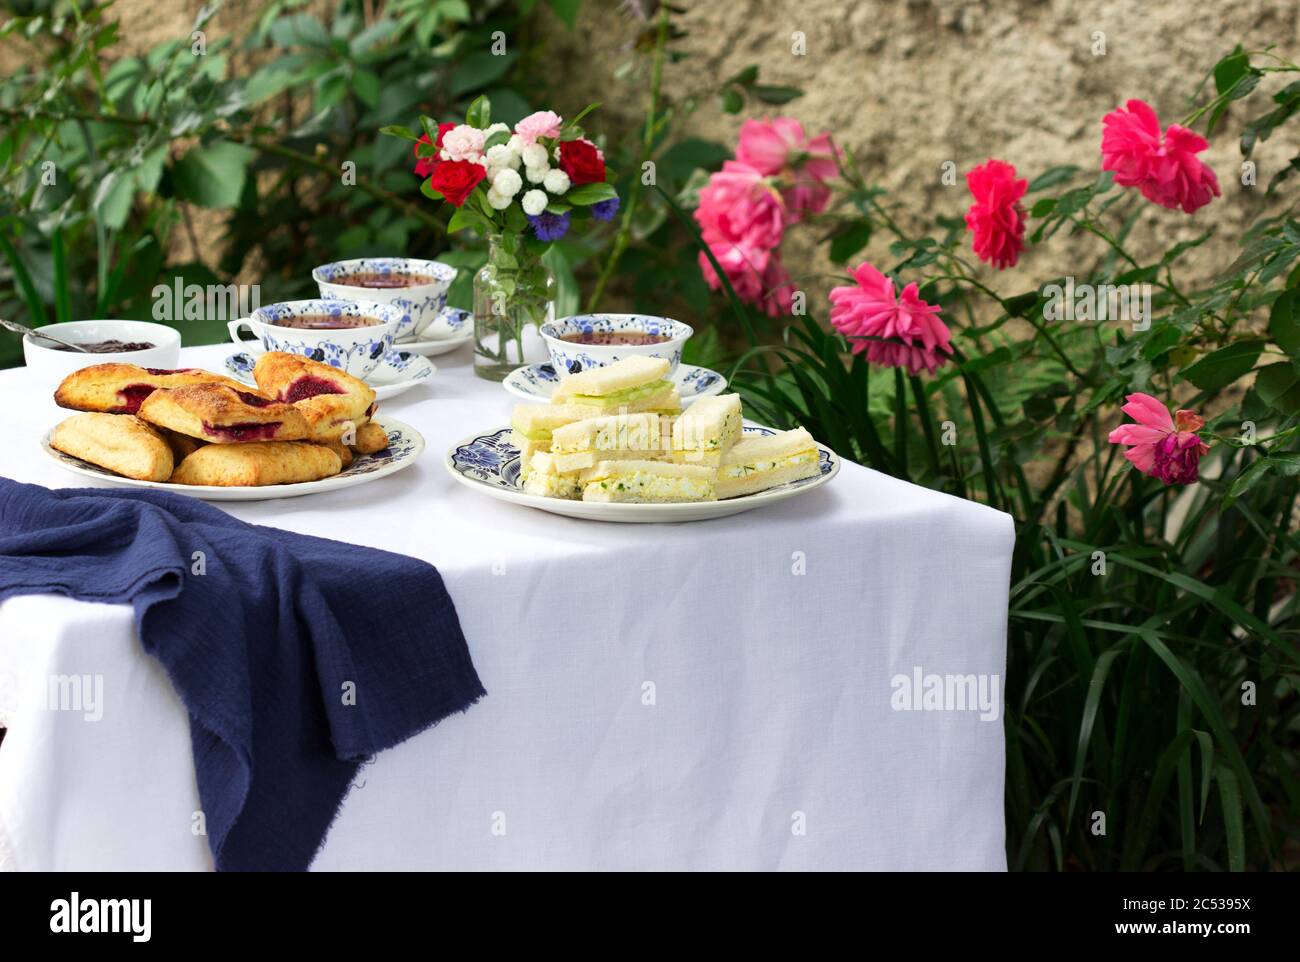 Afternoon tea in the garden with scones, strawberry jam, finger sandwiches with cucumber and egg salad. Stock Photo